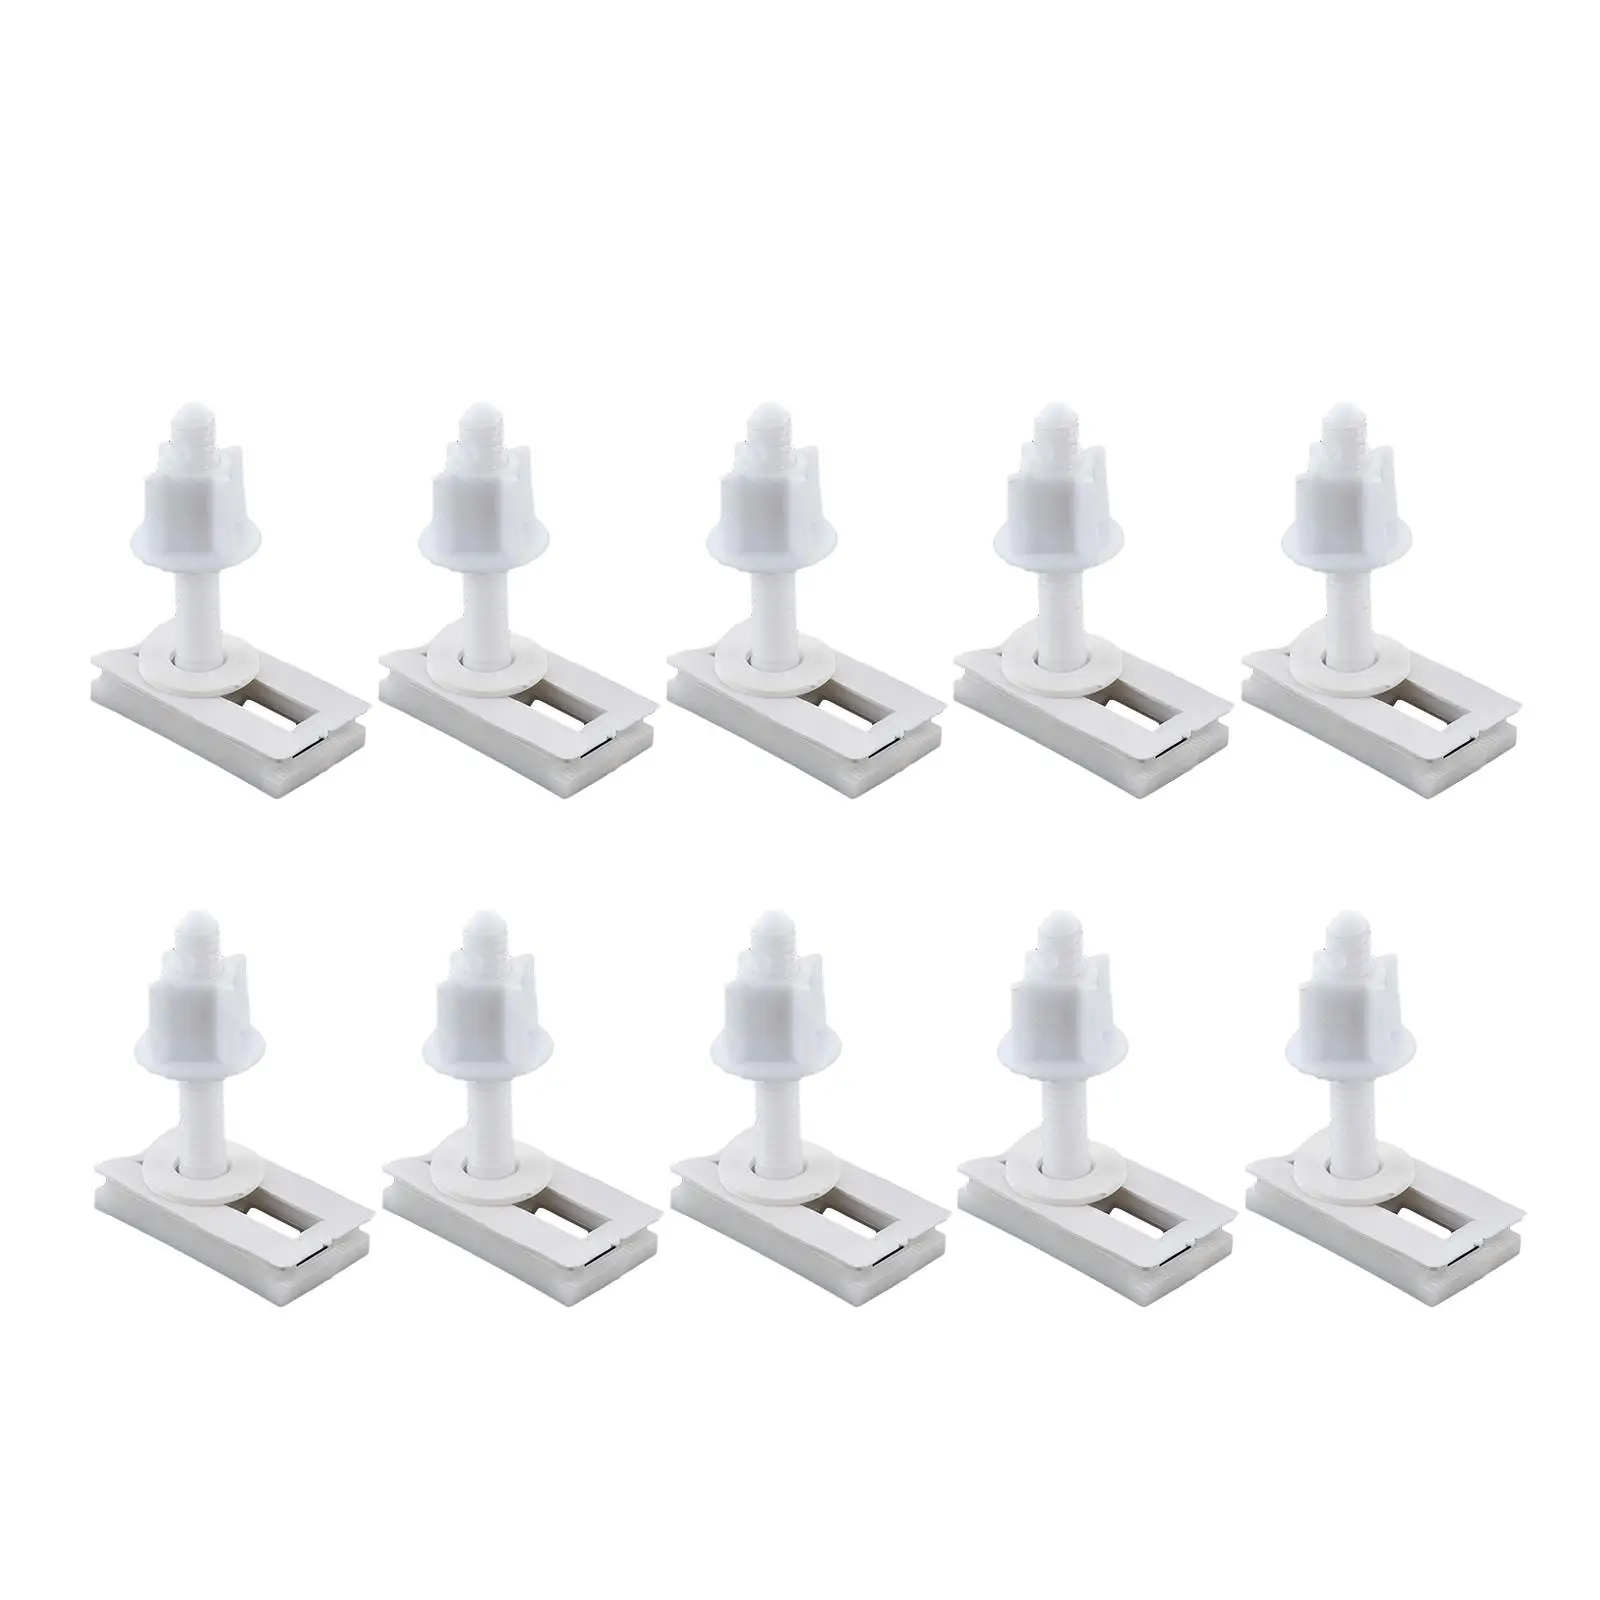 Toilet Seat Hinge Bolt Lightweight Durable Toilet Seat Repair Tool 10 Pieces for Household Hotels Public Places Office Bathrooms